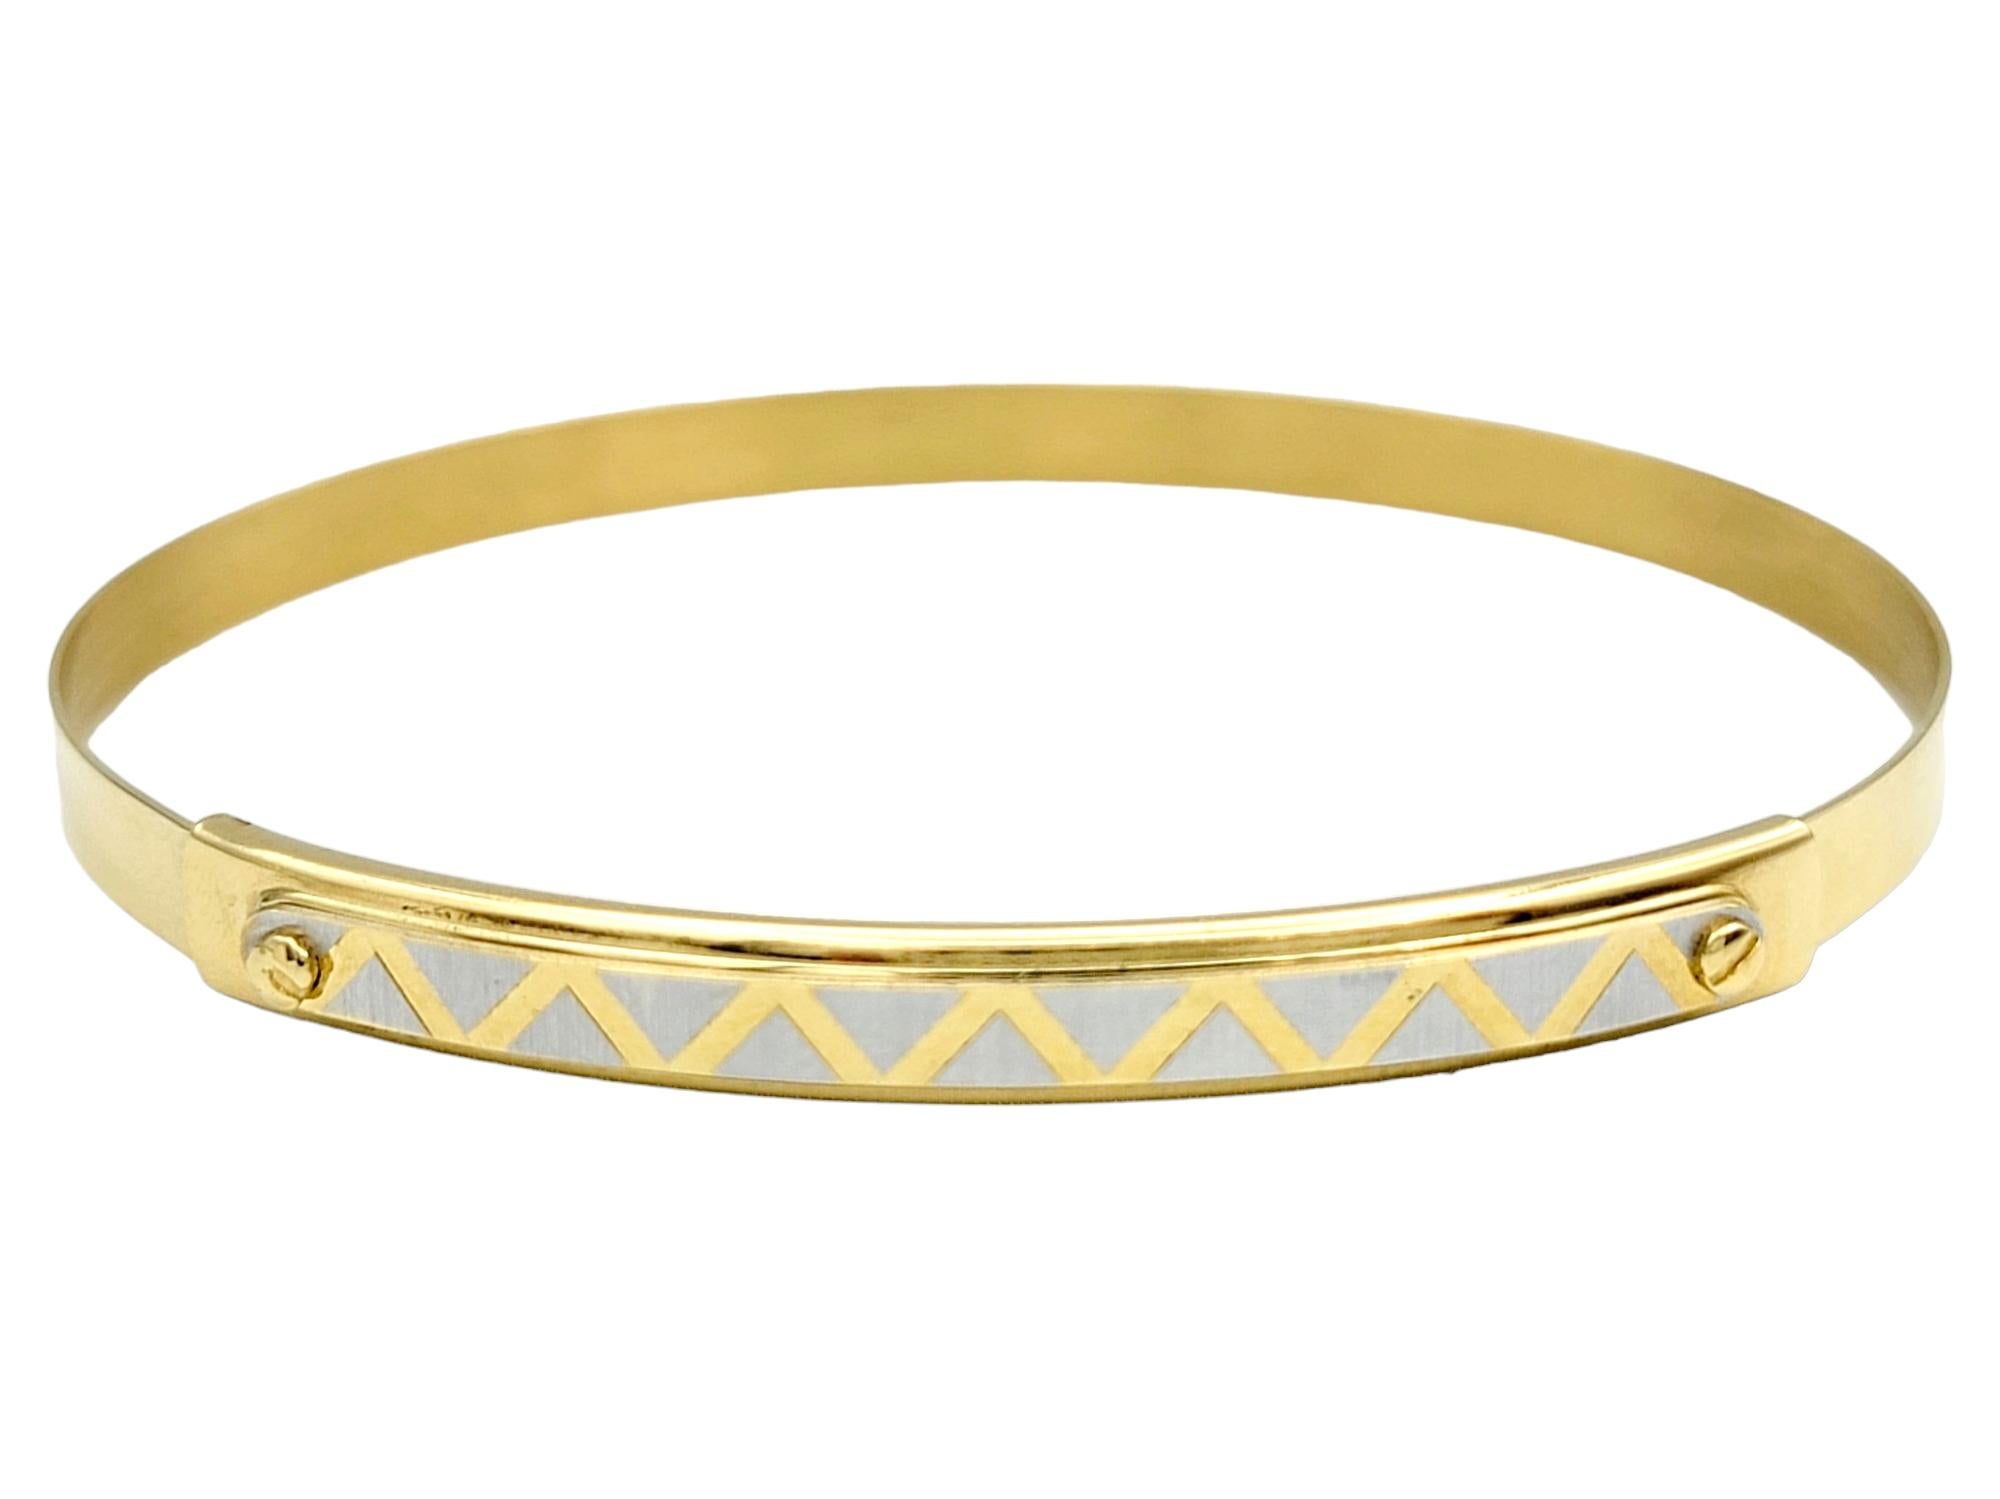 This sleek and stunning bangle bracelet, a creation by Ricciolo d'Oro, epitomizes elegance and versatility in fine jewelry. Meticulously crafted from opulent 18 karat gold, the bracelet boasts a slender and adjustable design, ensuring a perfect fit